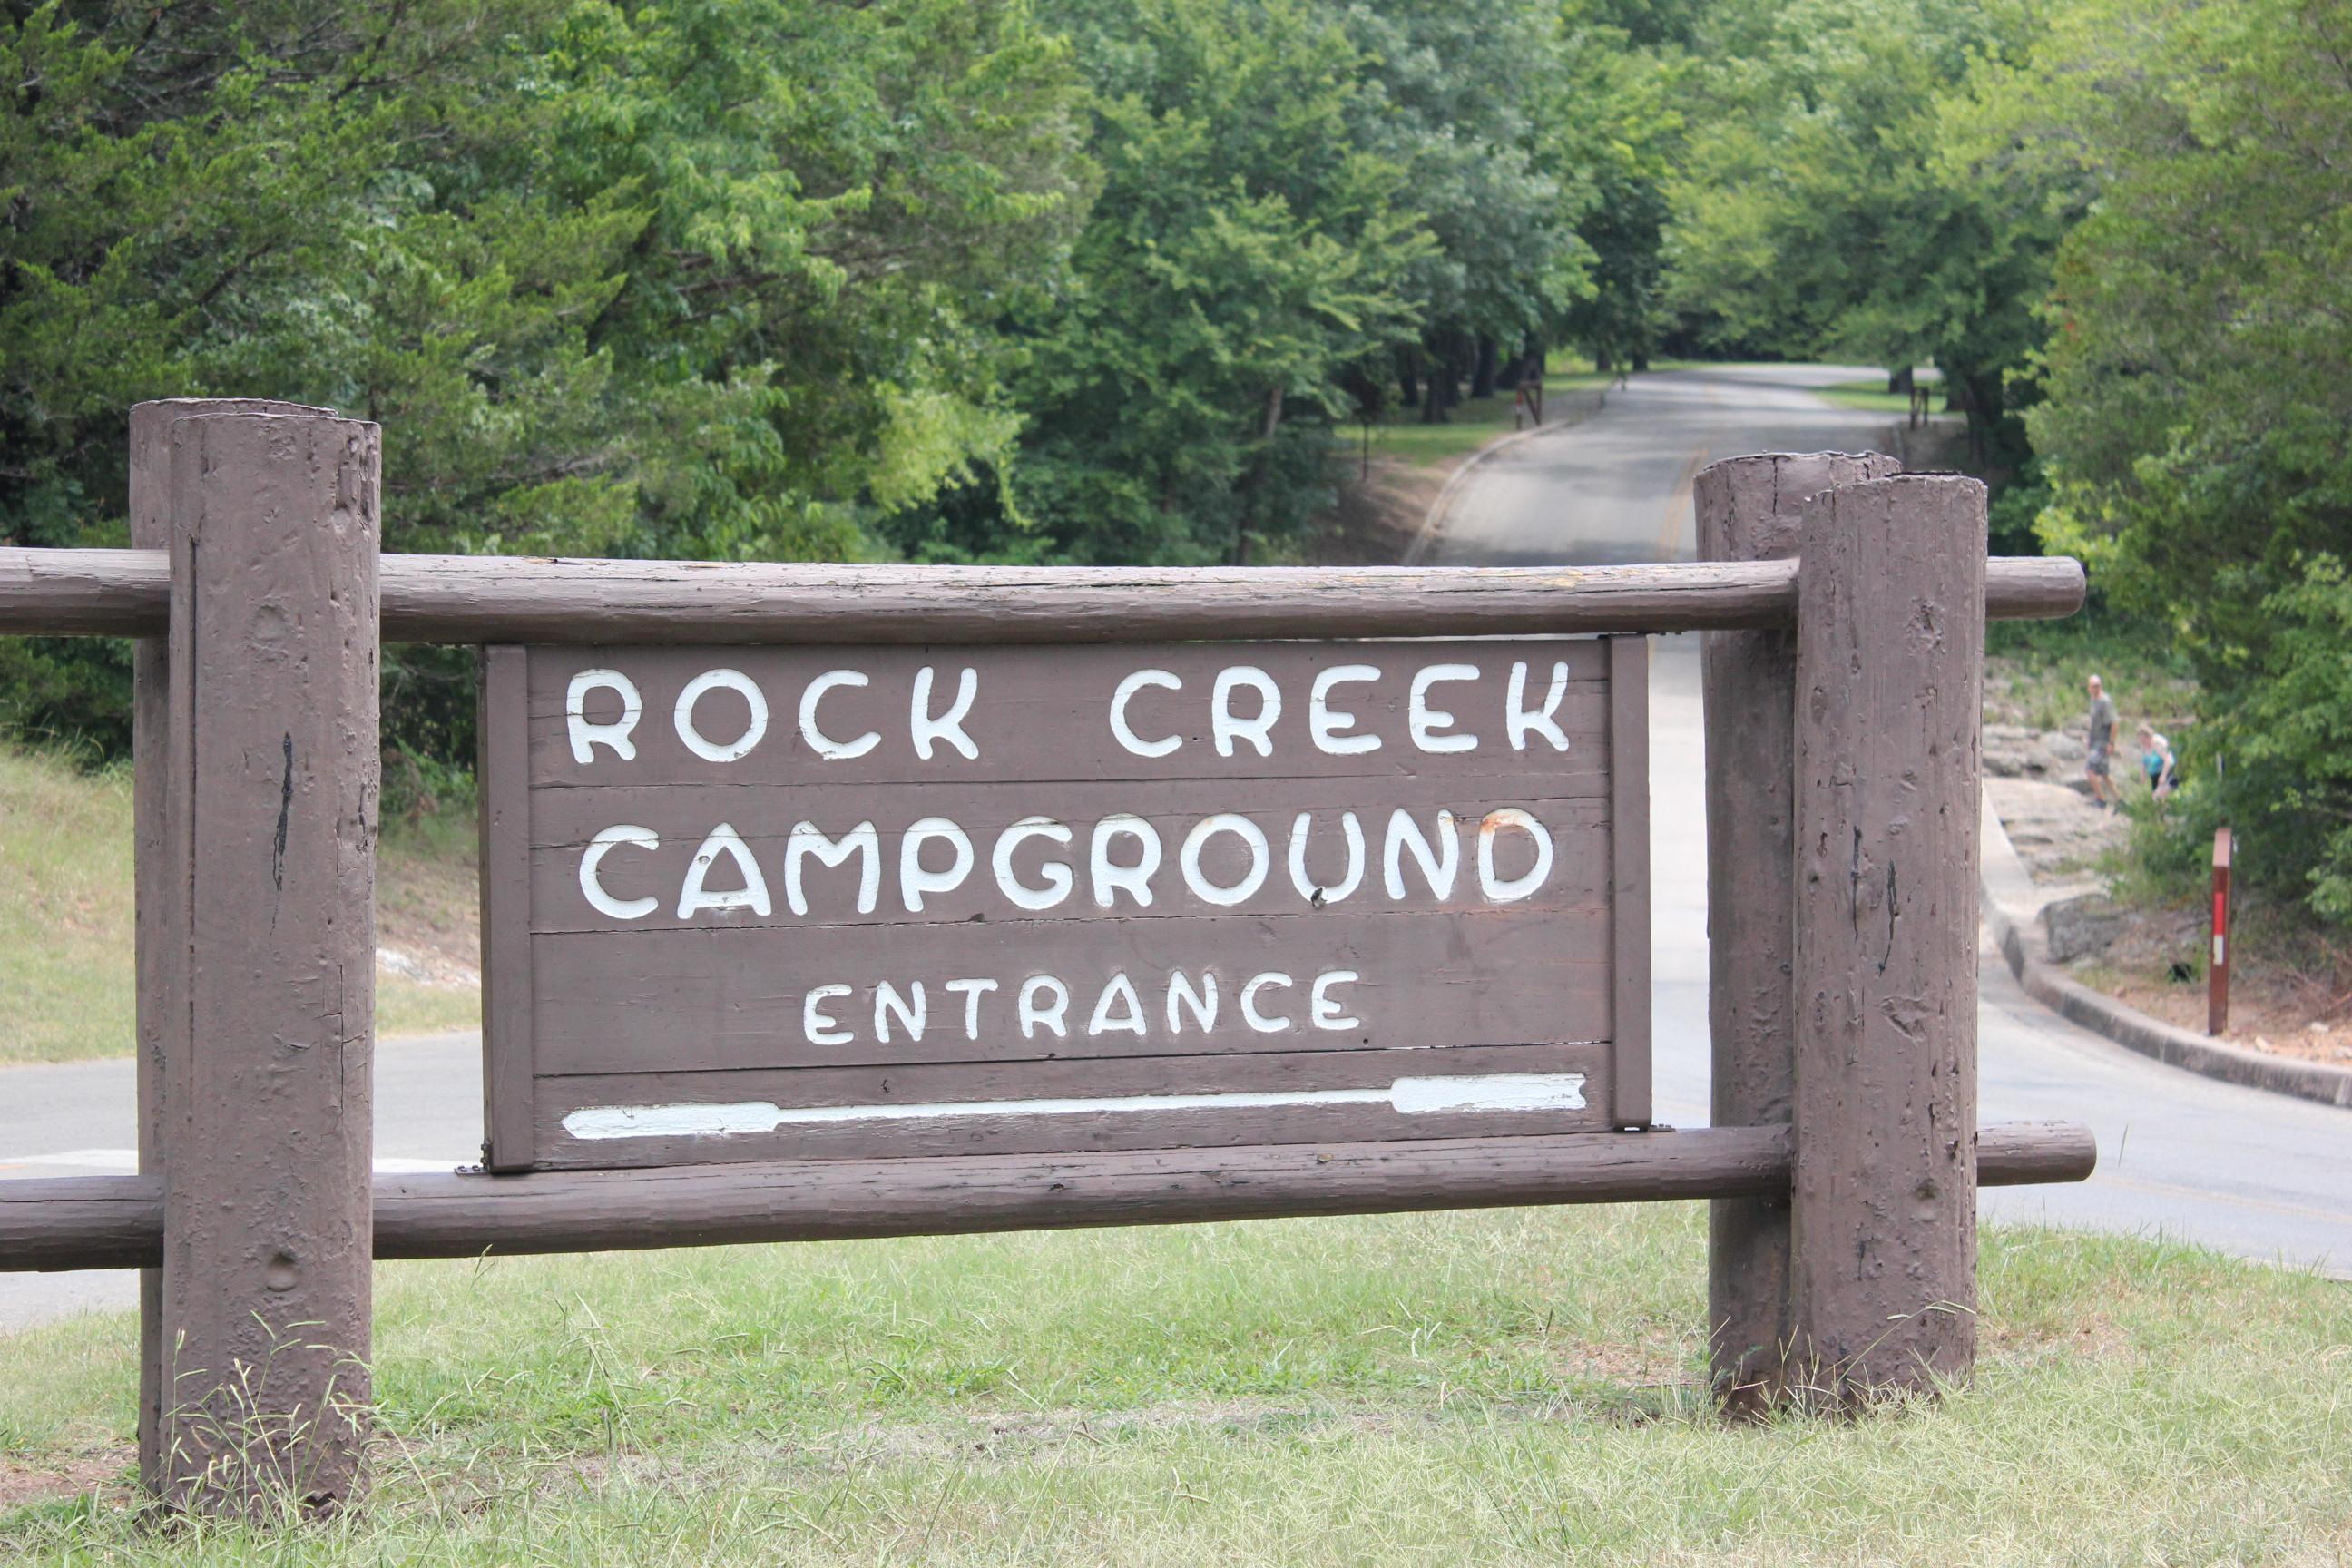 A large, old style wood sign with white lettering states "Rock Creek Campground Entrance"